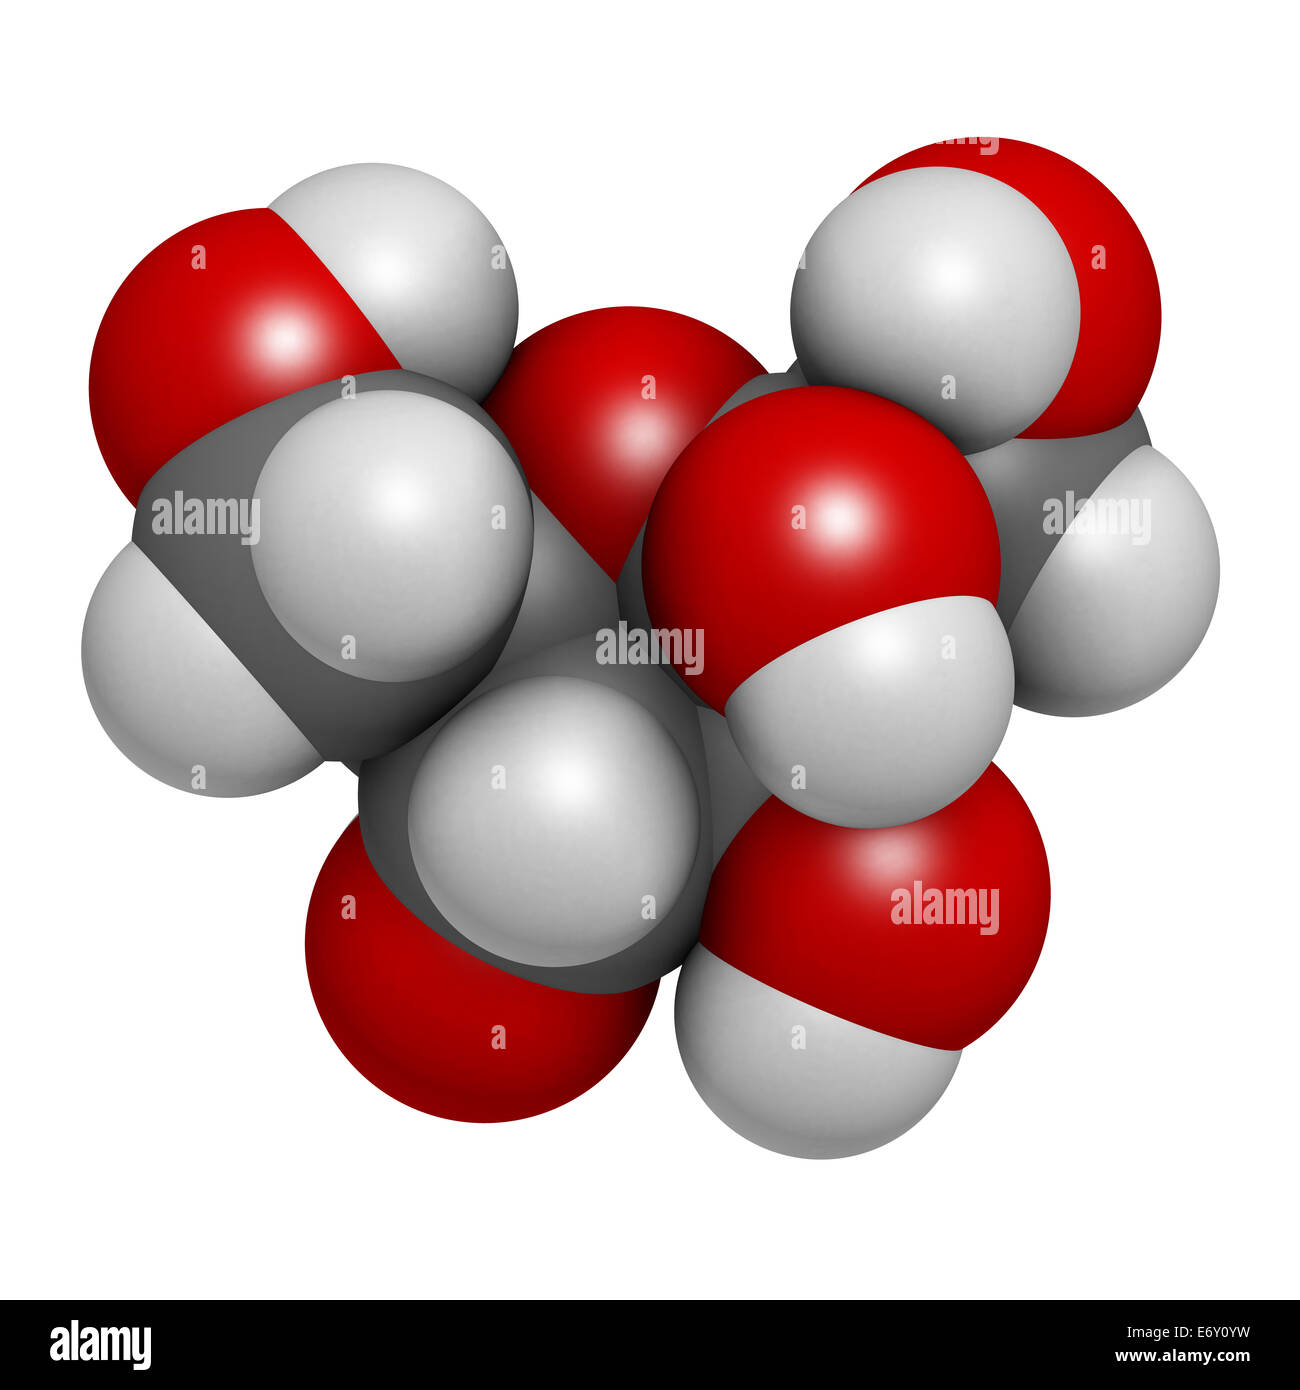 Fructose (D-fructose) fruit sugar molecule. Component of high-fructose corn syrup (HFCS). Atoms are represented as spheres with  Stock Photo